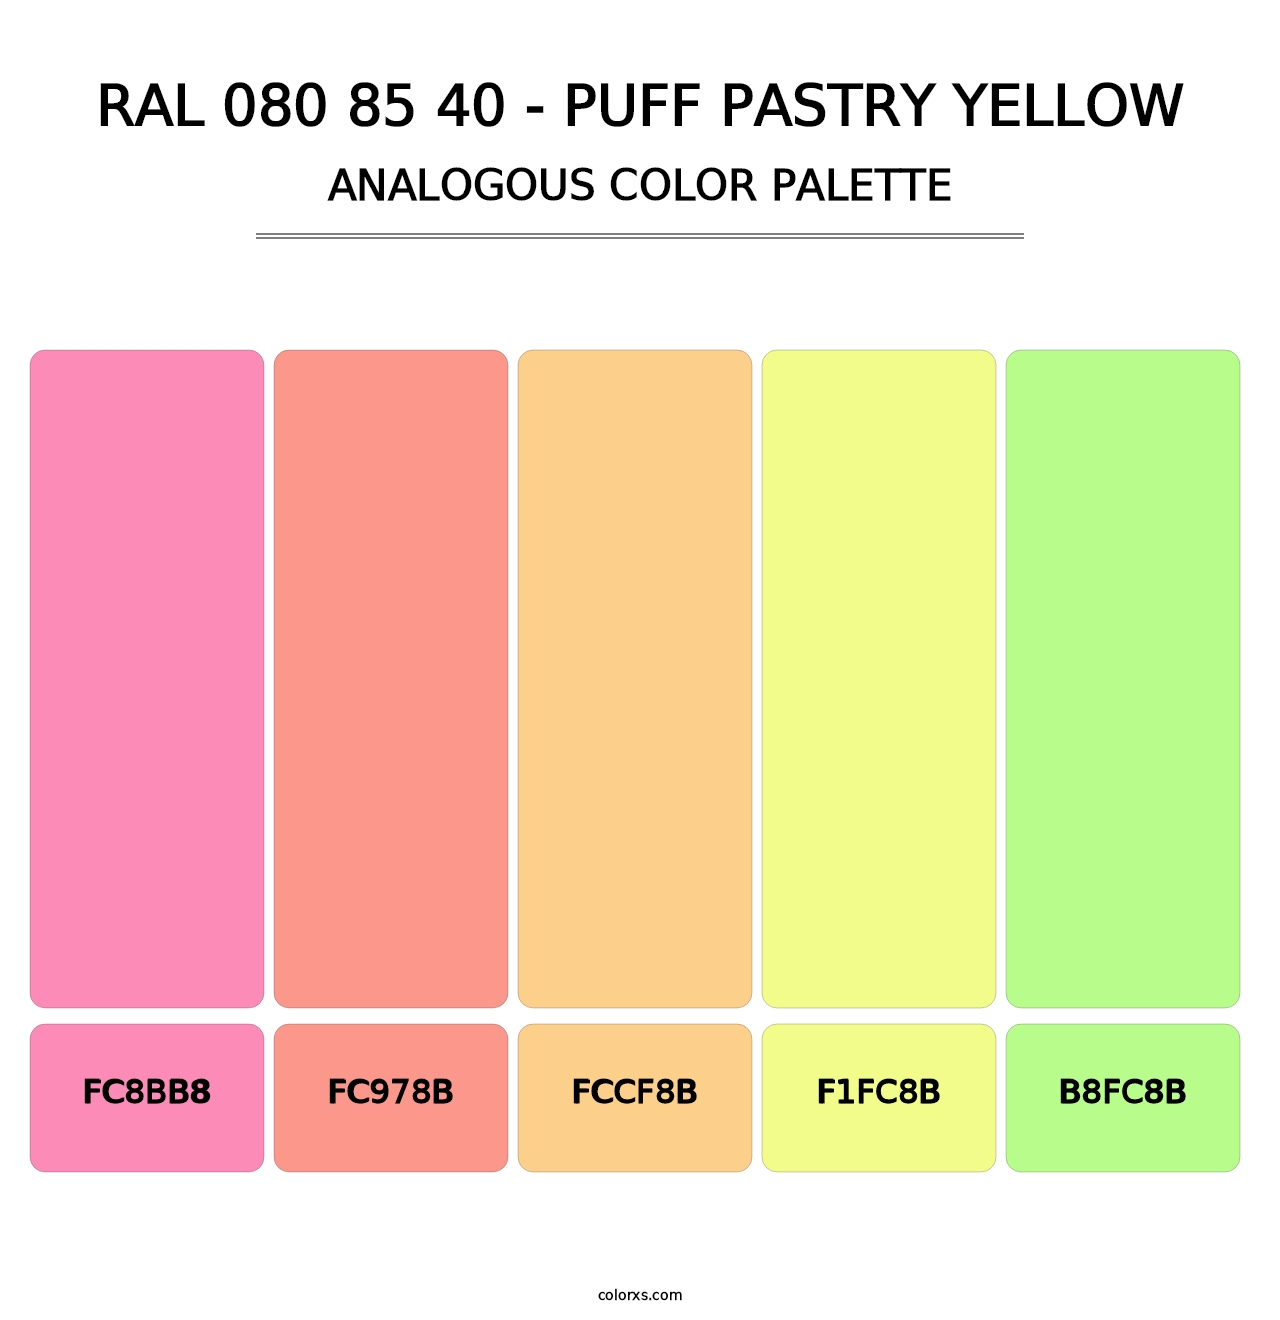 RAL 080 85 40 - Puff Pastry Yellow - Analogous Color Palette